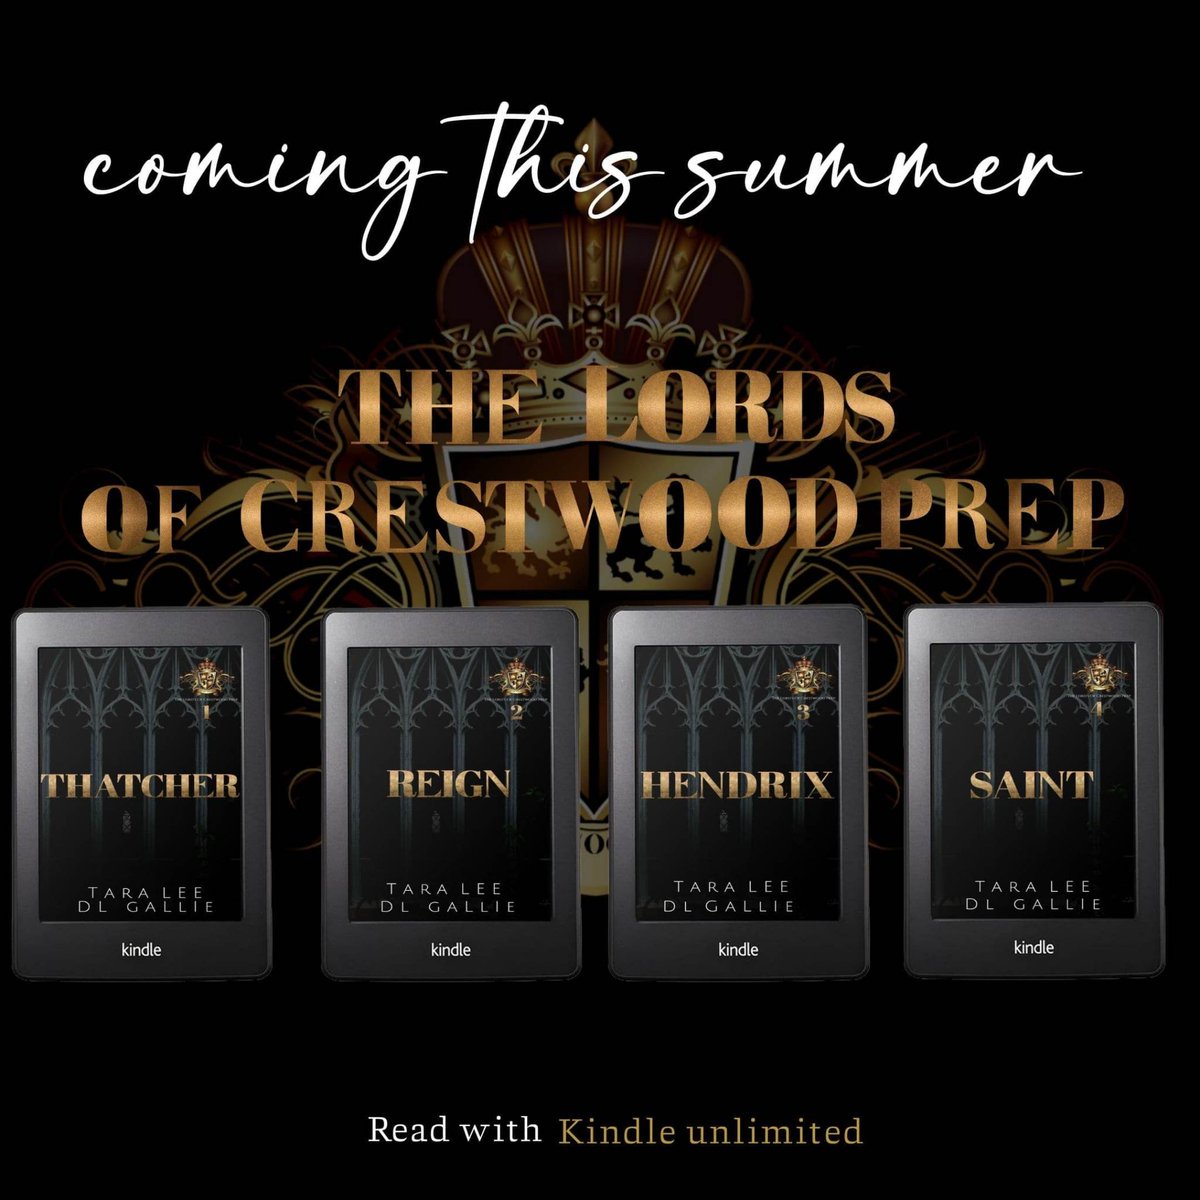 🖤ALL New Event Announcement! 🖤
Upcoming reveal & release: Lords of Crestwood Prep by Tara Lee  & Author DL Gallie 

Enemies to lovers | Bully | Secrets | Betrayal | Twisted games | Elite Prep School 
forms.gle/q4kwd7cNhtfWcV…
#dsbookpromotions #openevent #bookpromo